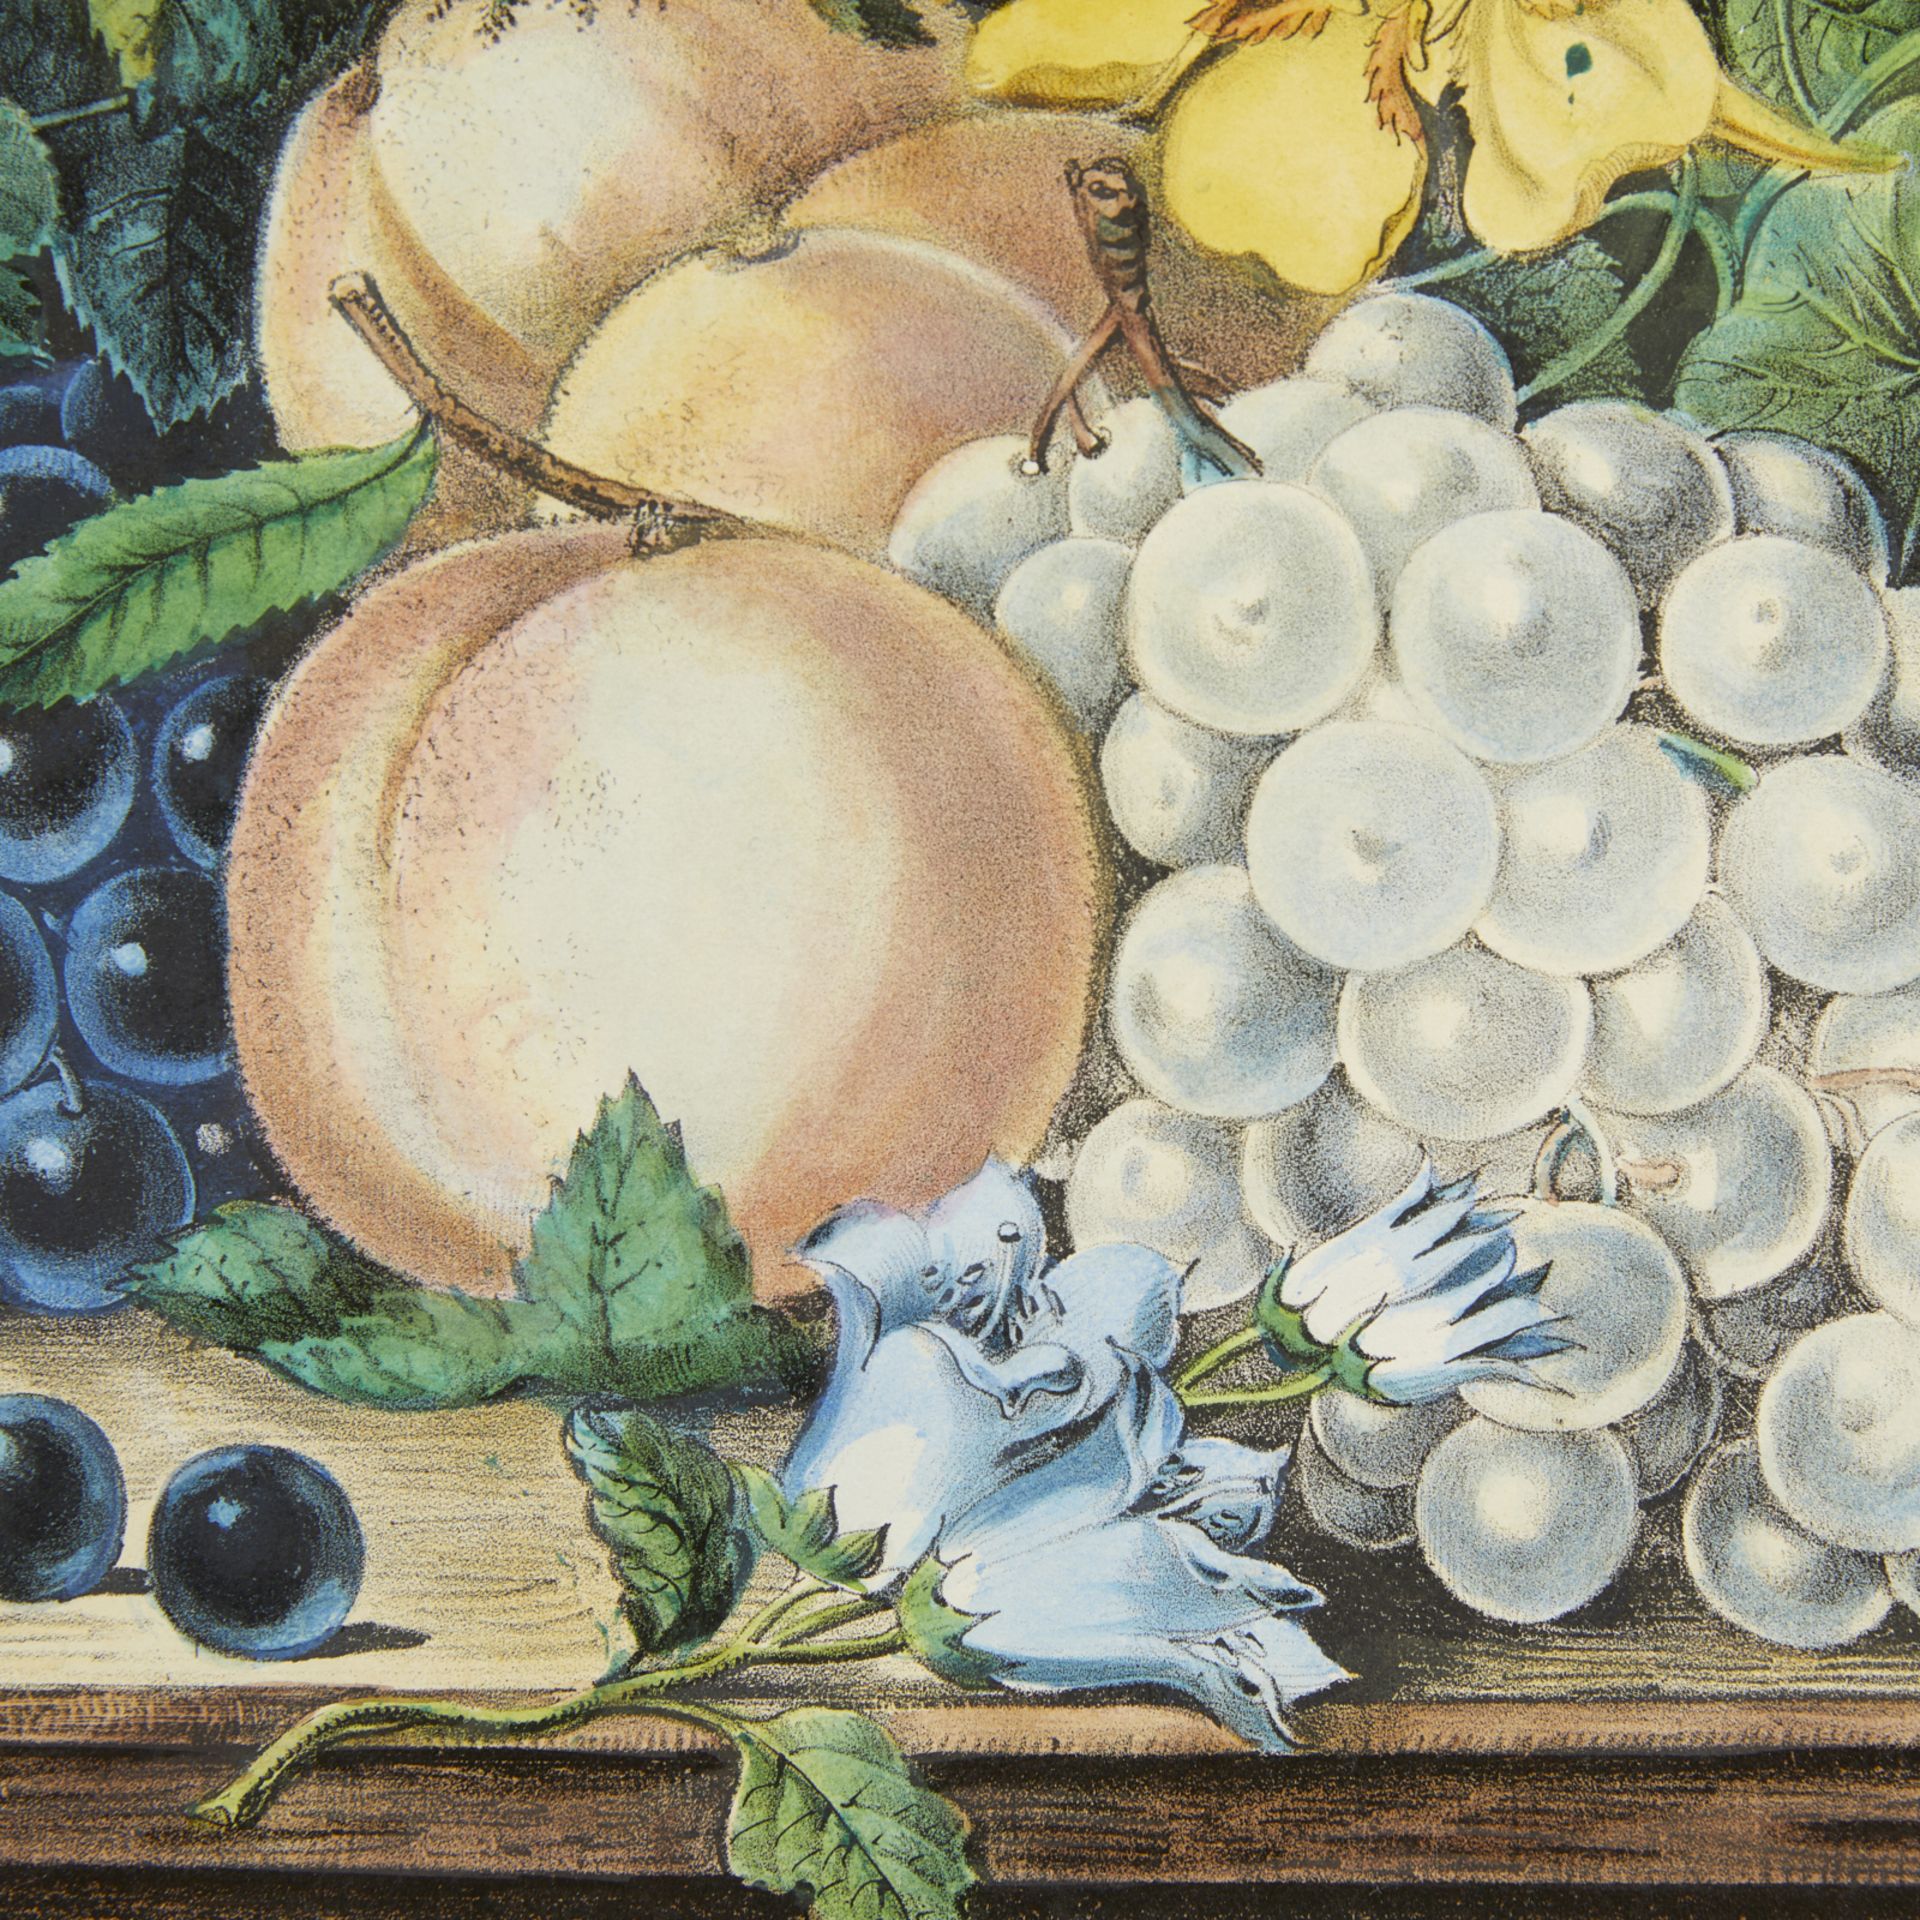 Currier & Ives "Fruit & Flowers" Print 1870 - Image 6 of 8